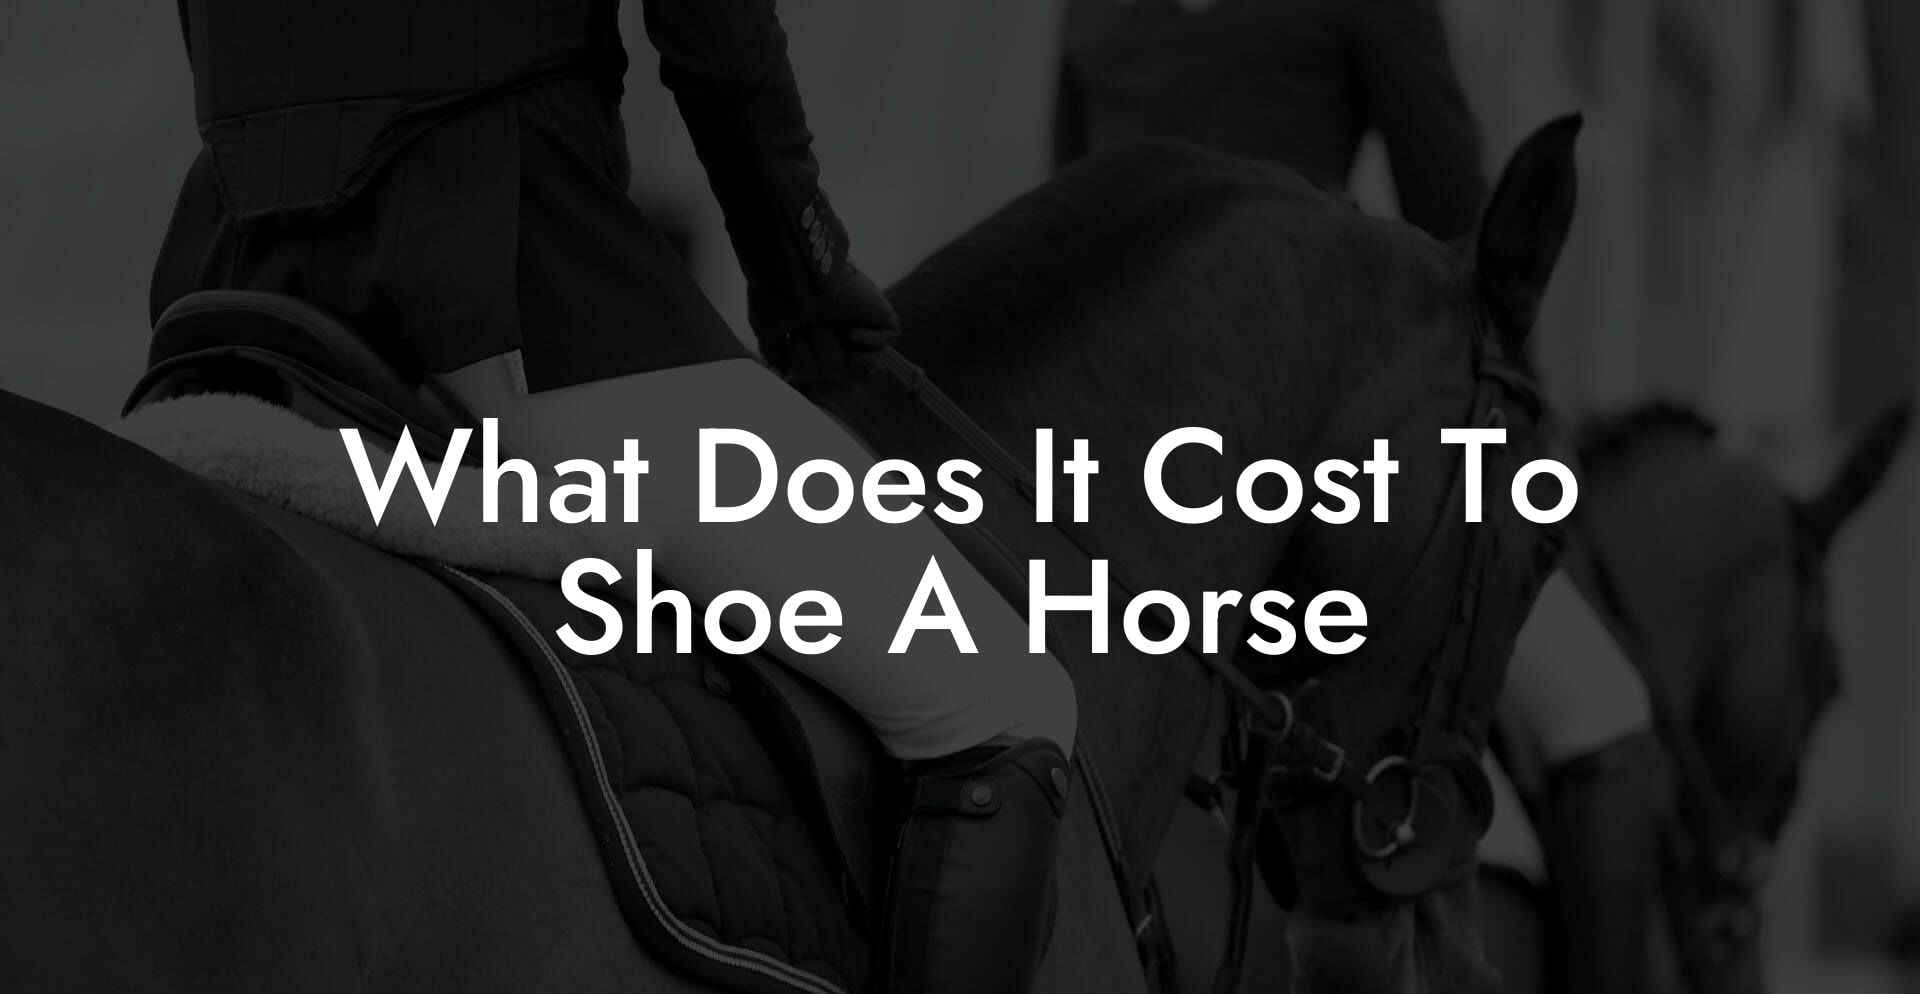 What Does It Cost To Shoe A Horse